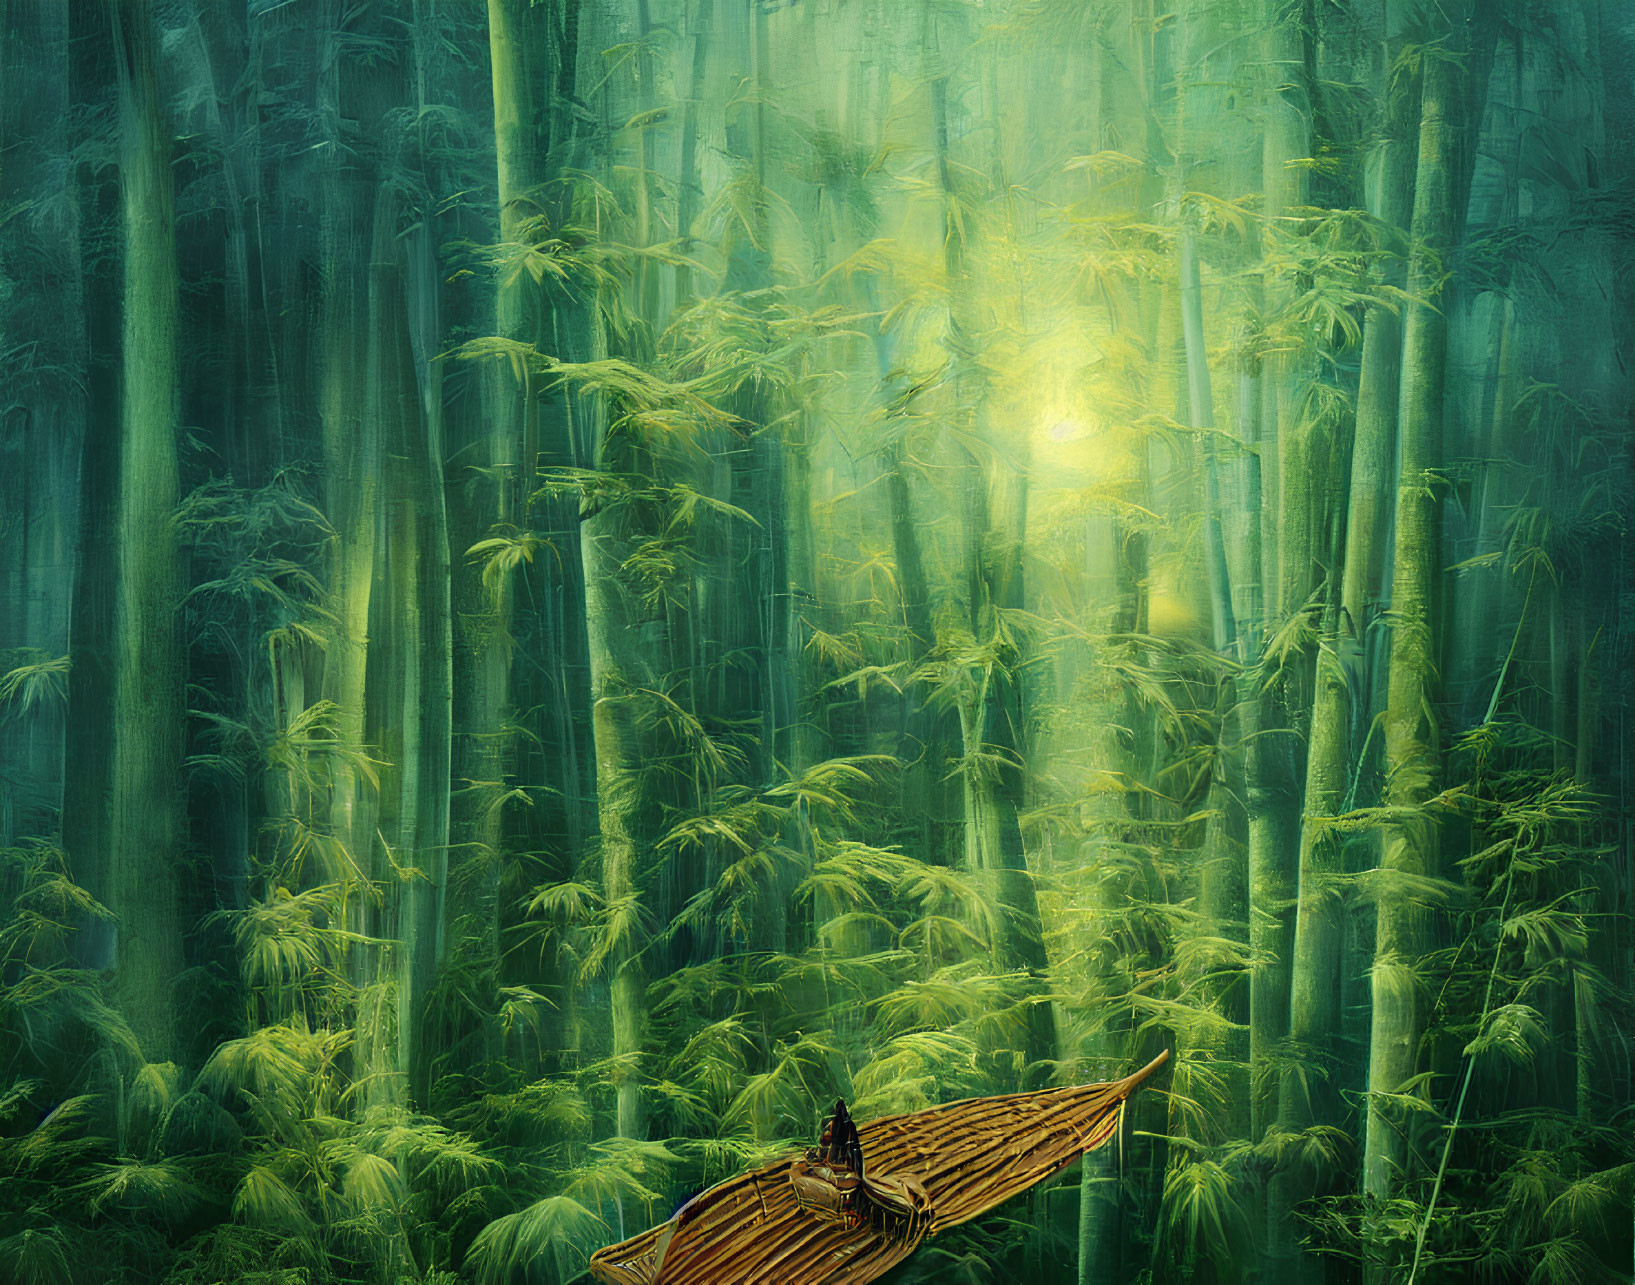 Person standing on wooden boat in serene bamboo forest with sunlight filtering through foliage